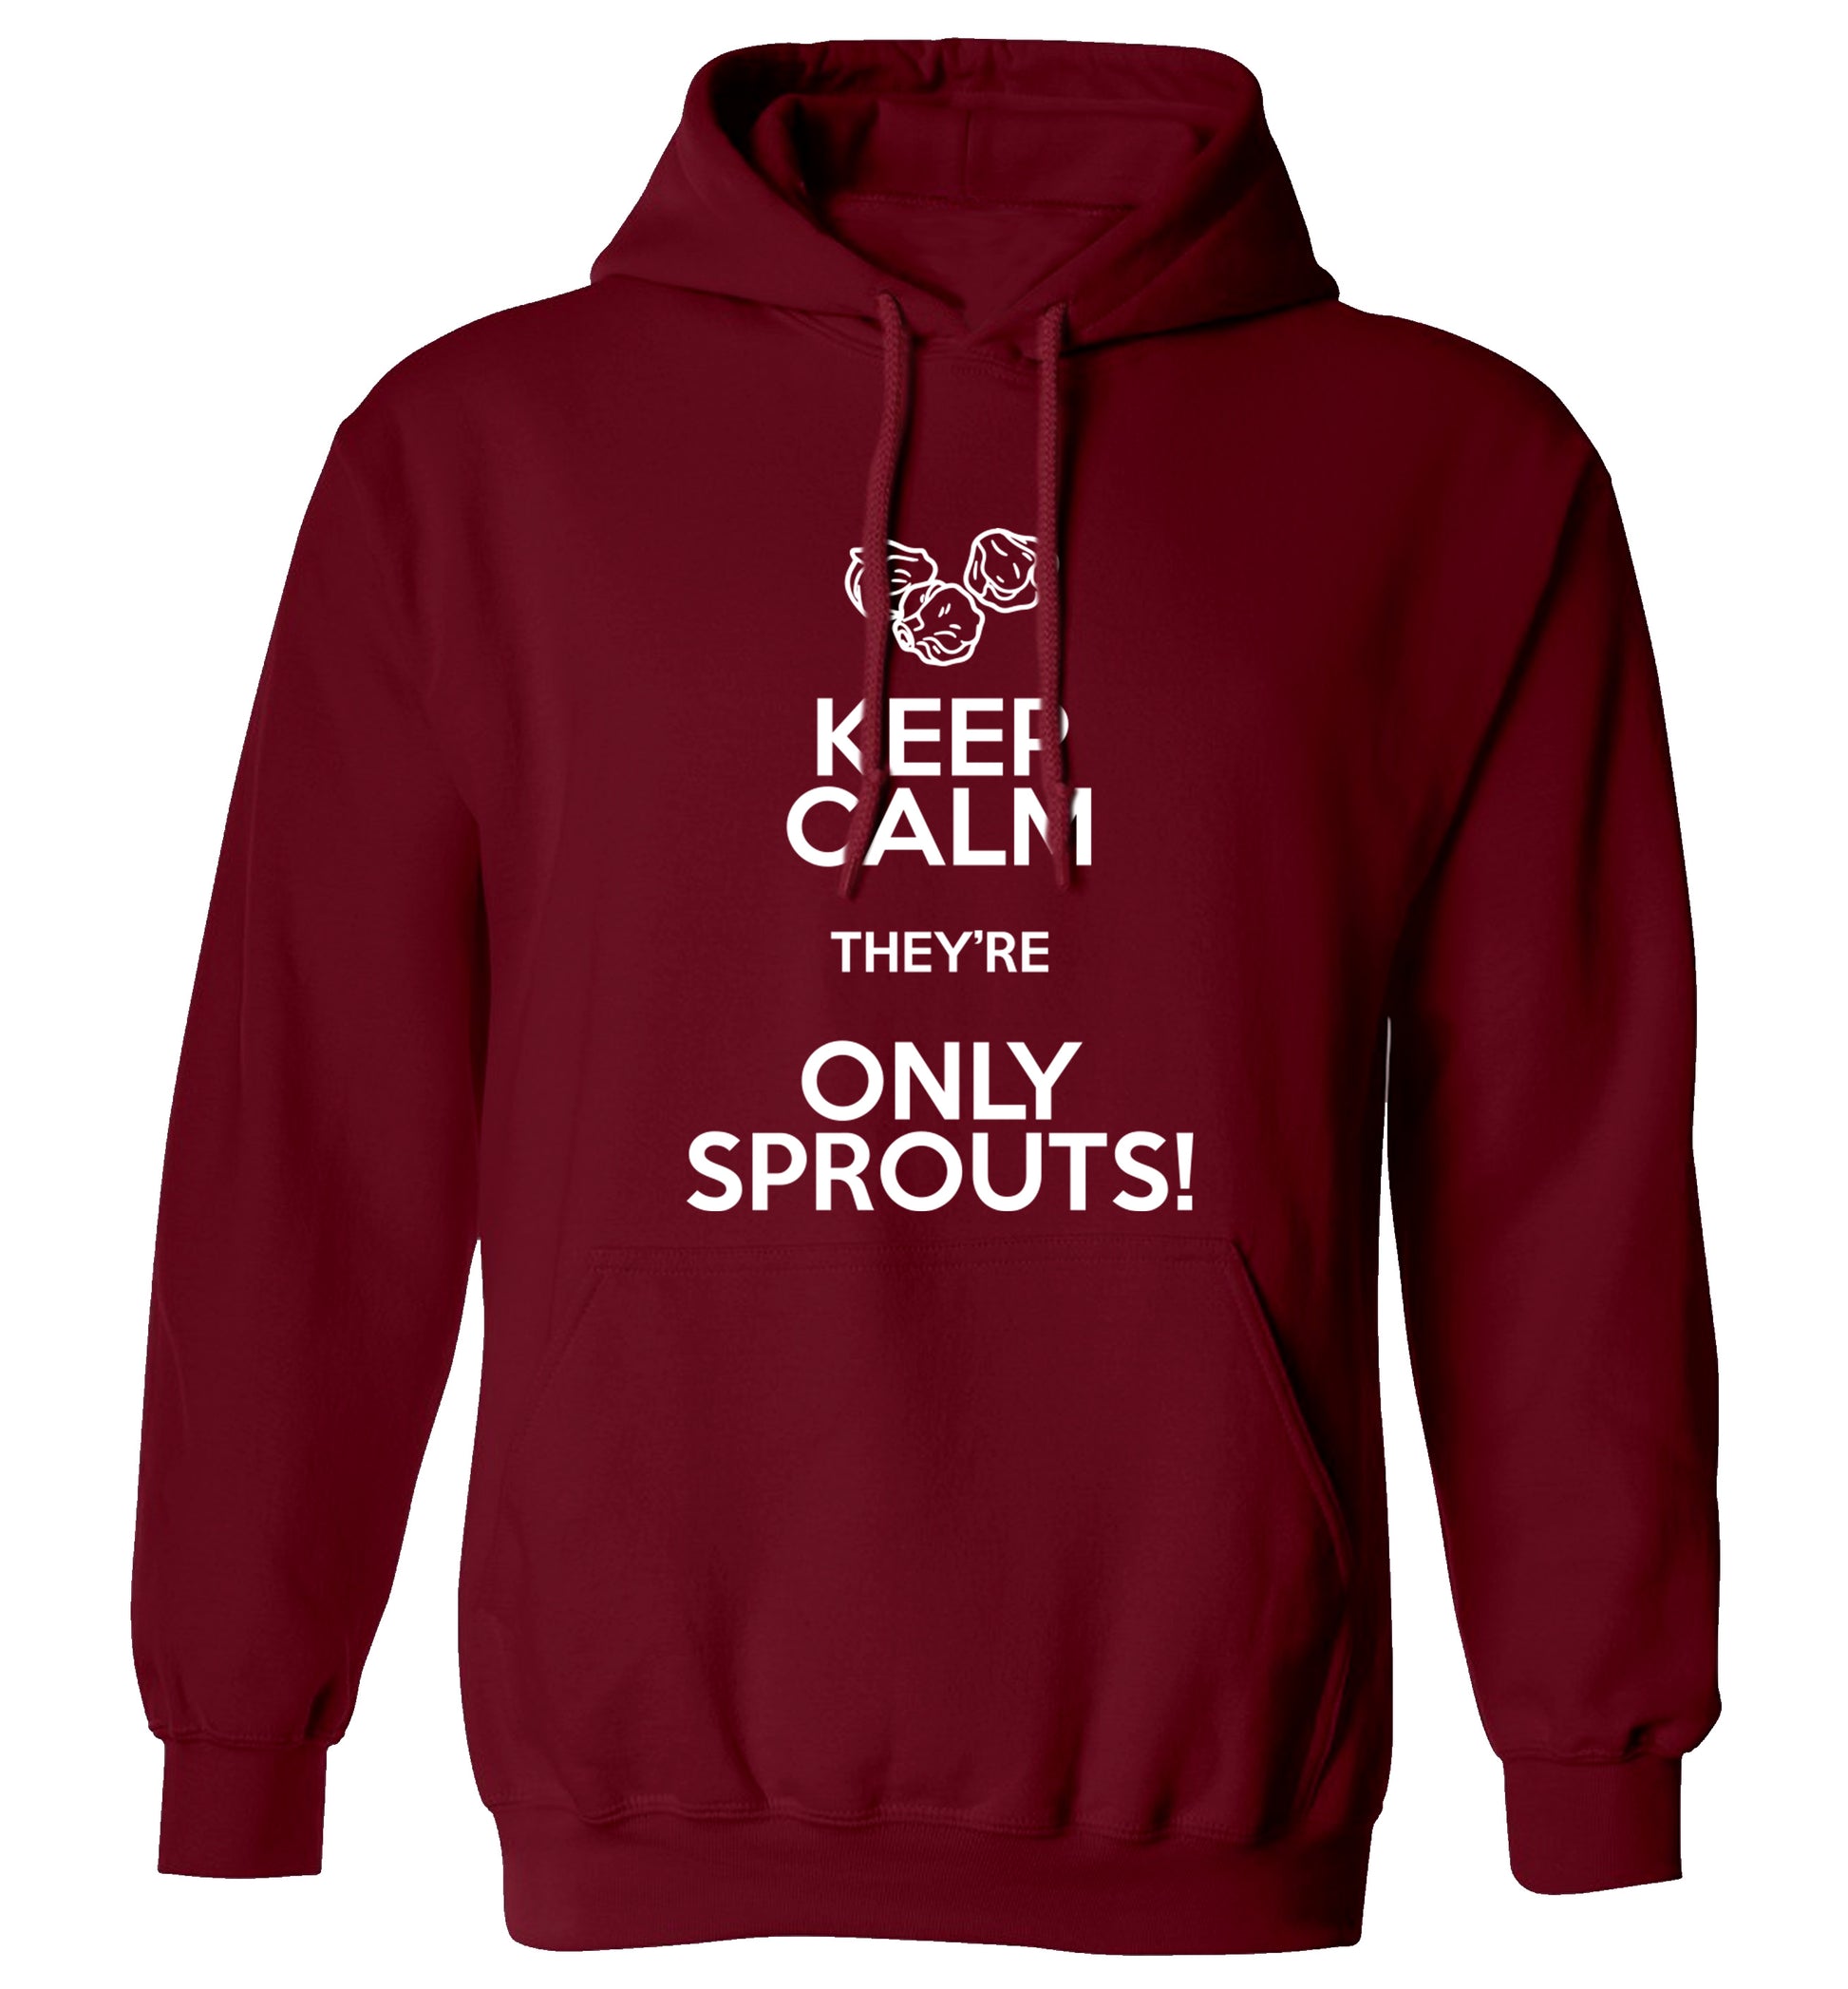 Keep calm they're only sprouts adults unisex maroon hoodie 2XL